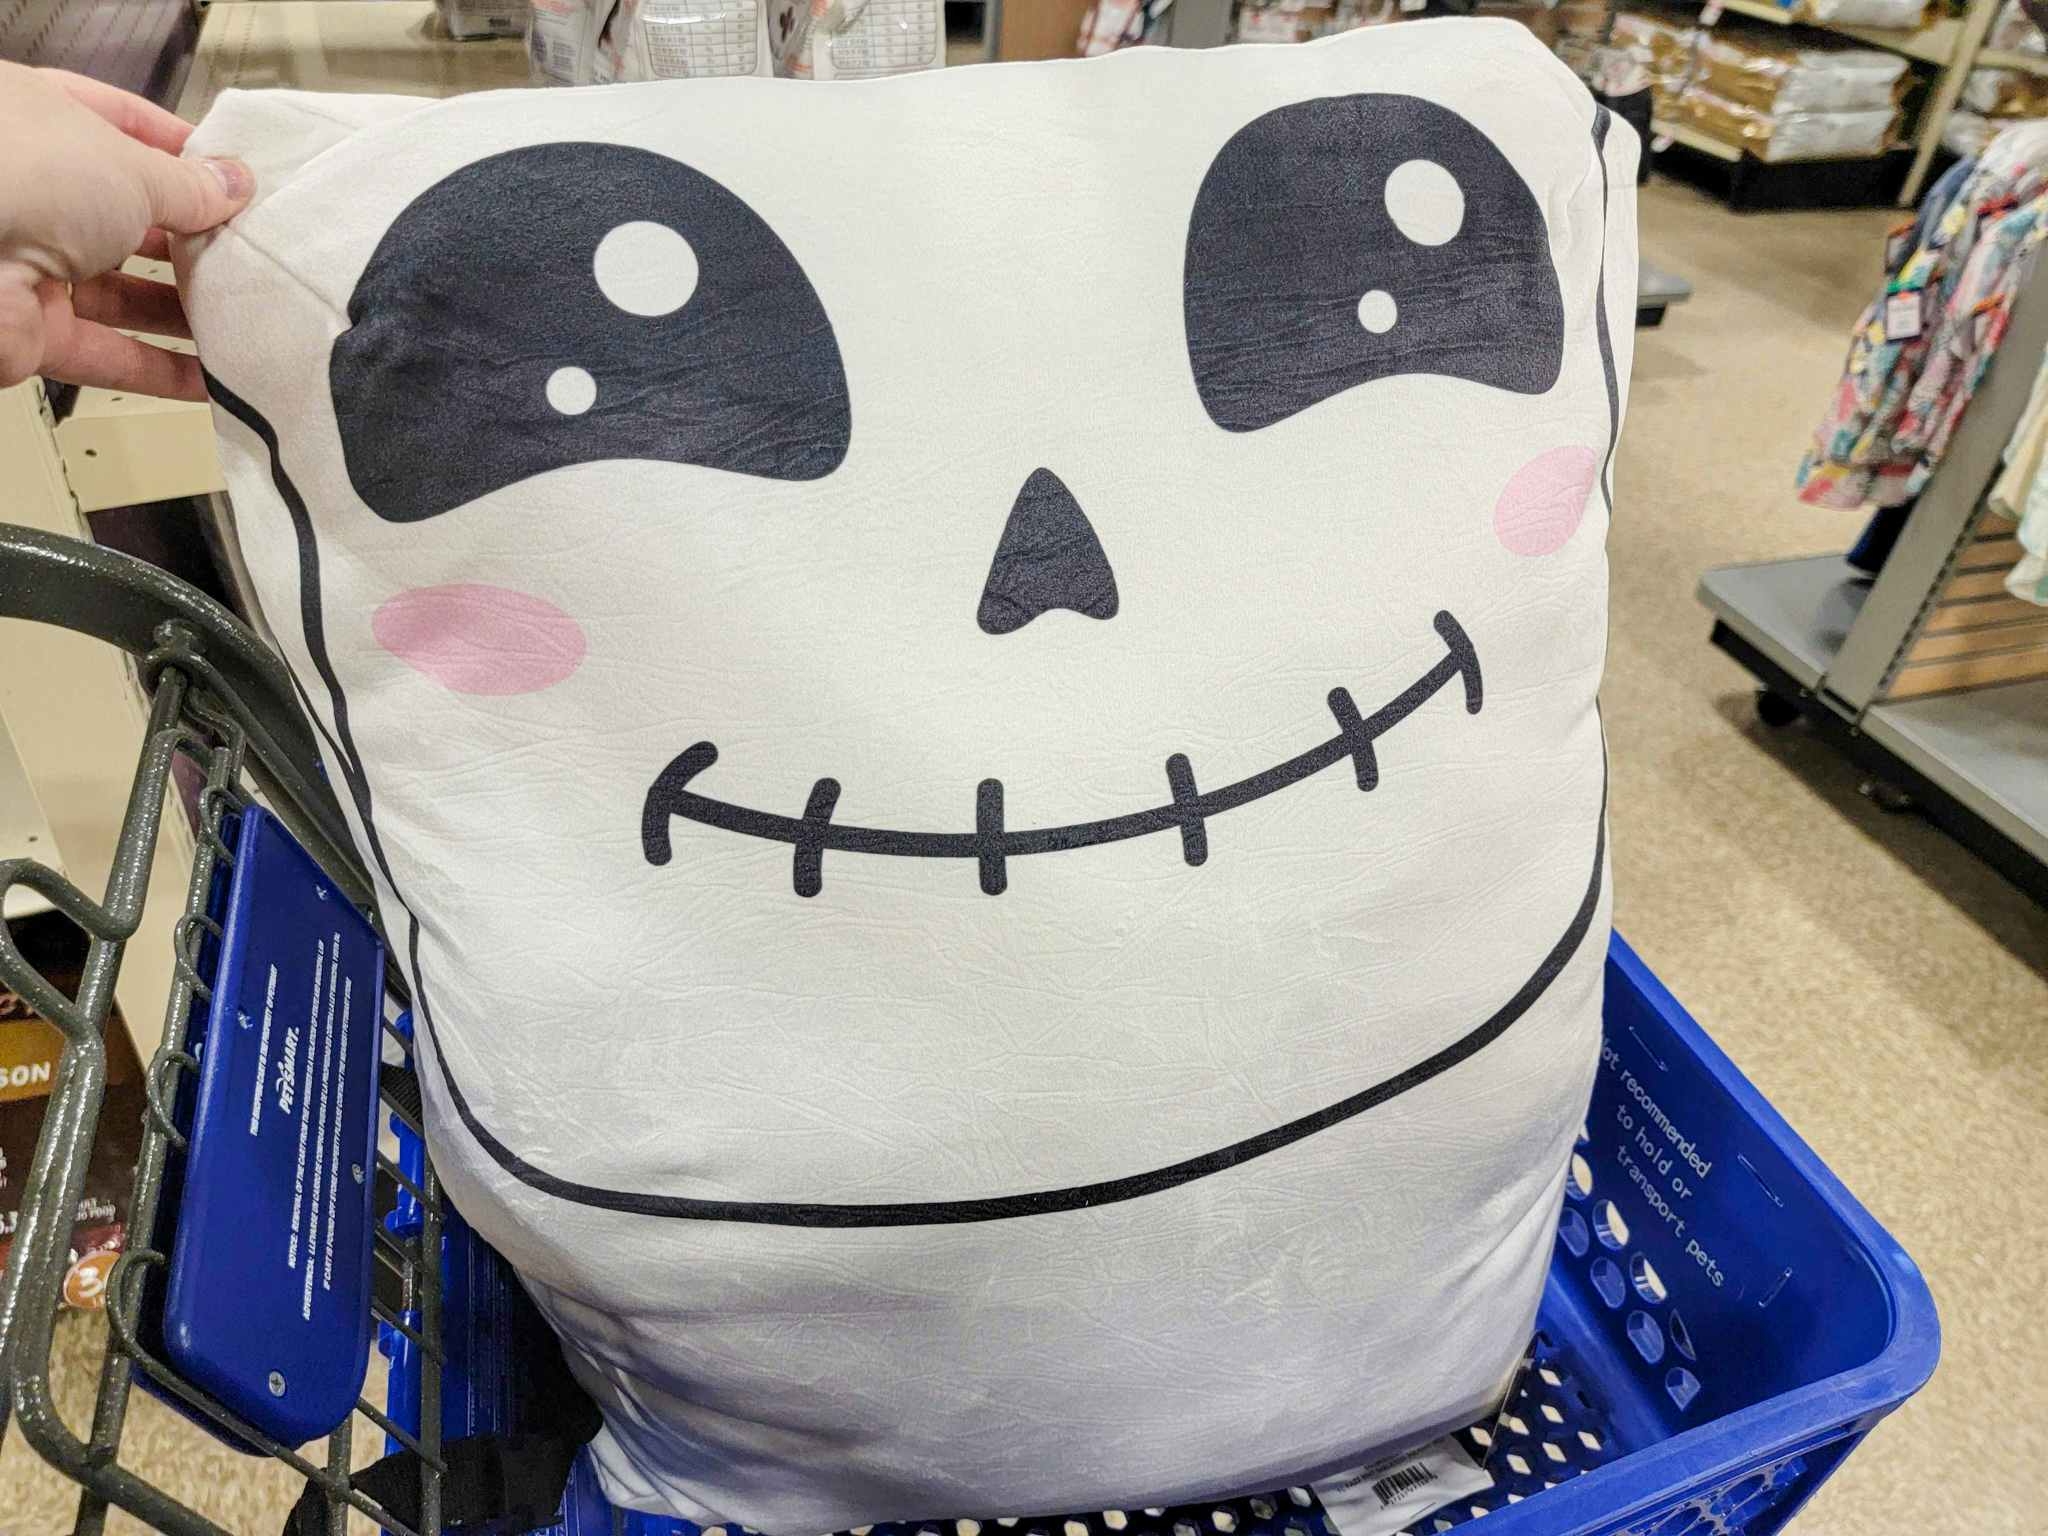 a smiling skeleton pet bed in a cart